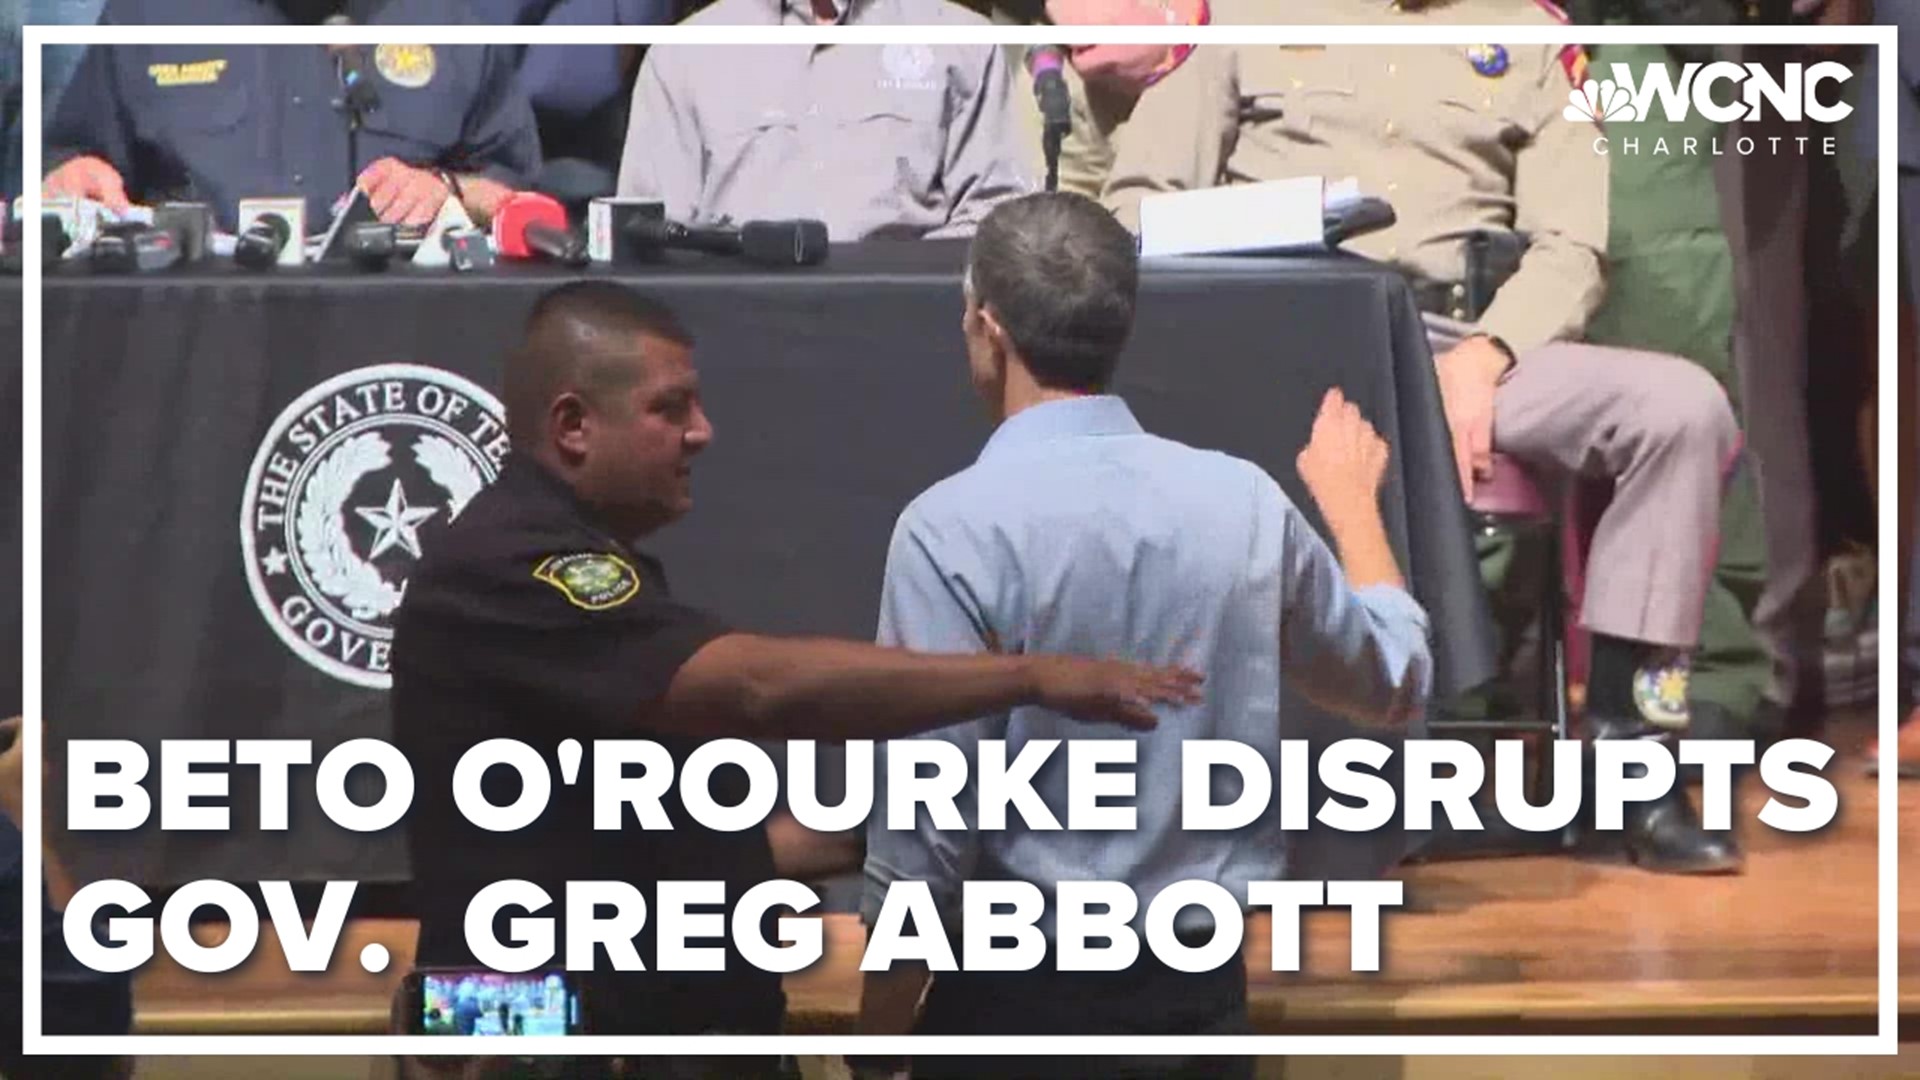 Beto O'Rourke, a democrat running for Texas governor, disrupts Texas elected officials discussing the Uvalde school shooting.